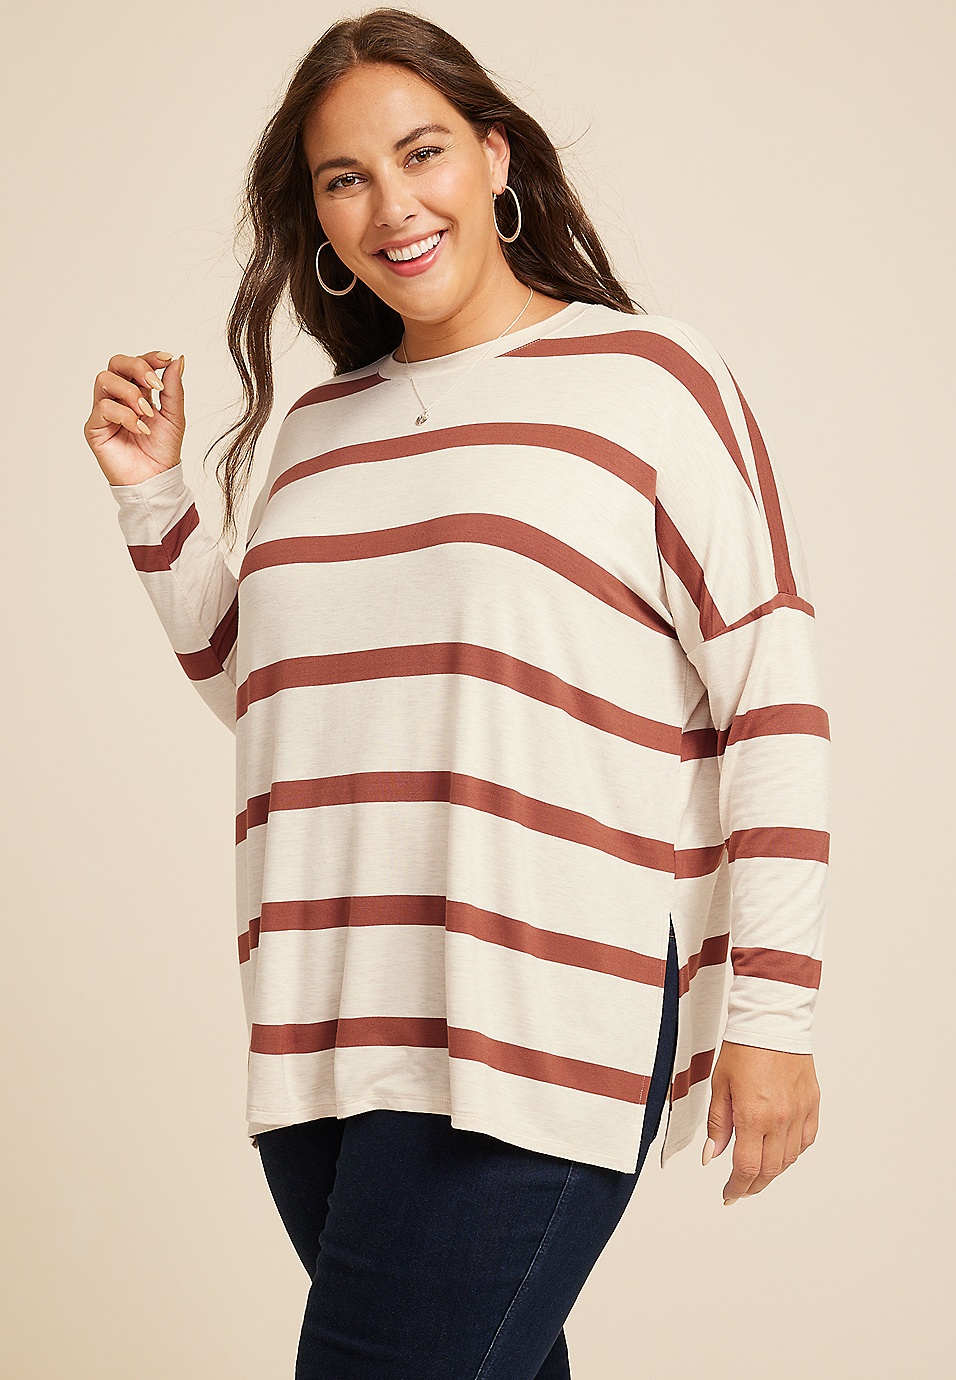 Plus Size 24/7 Striped Top | maurices